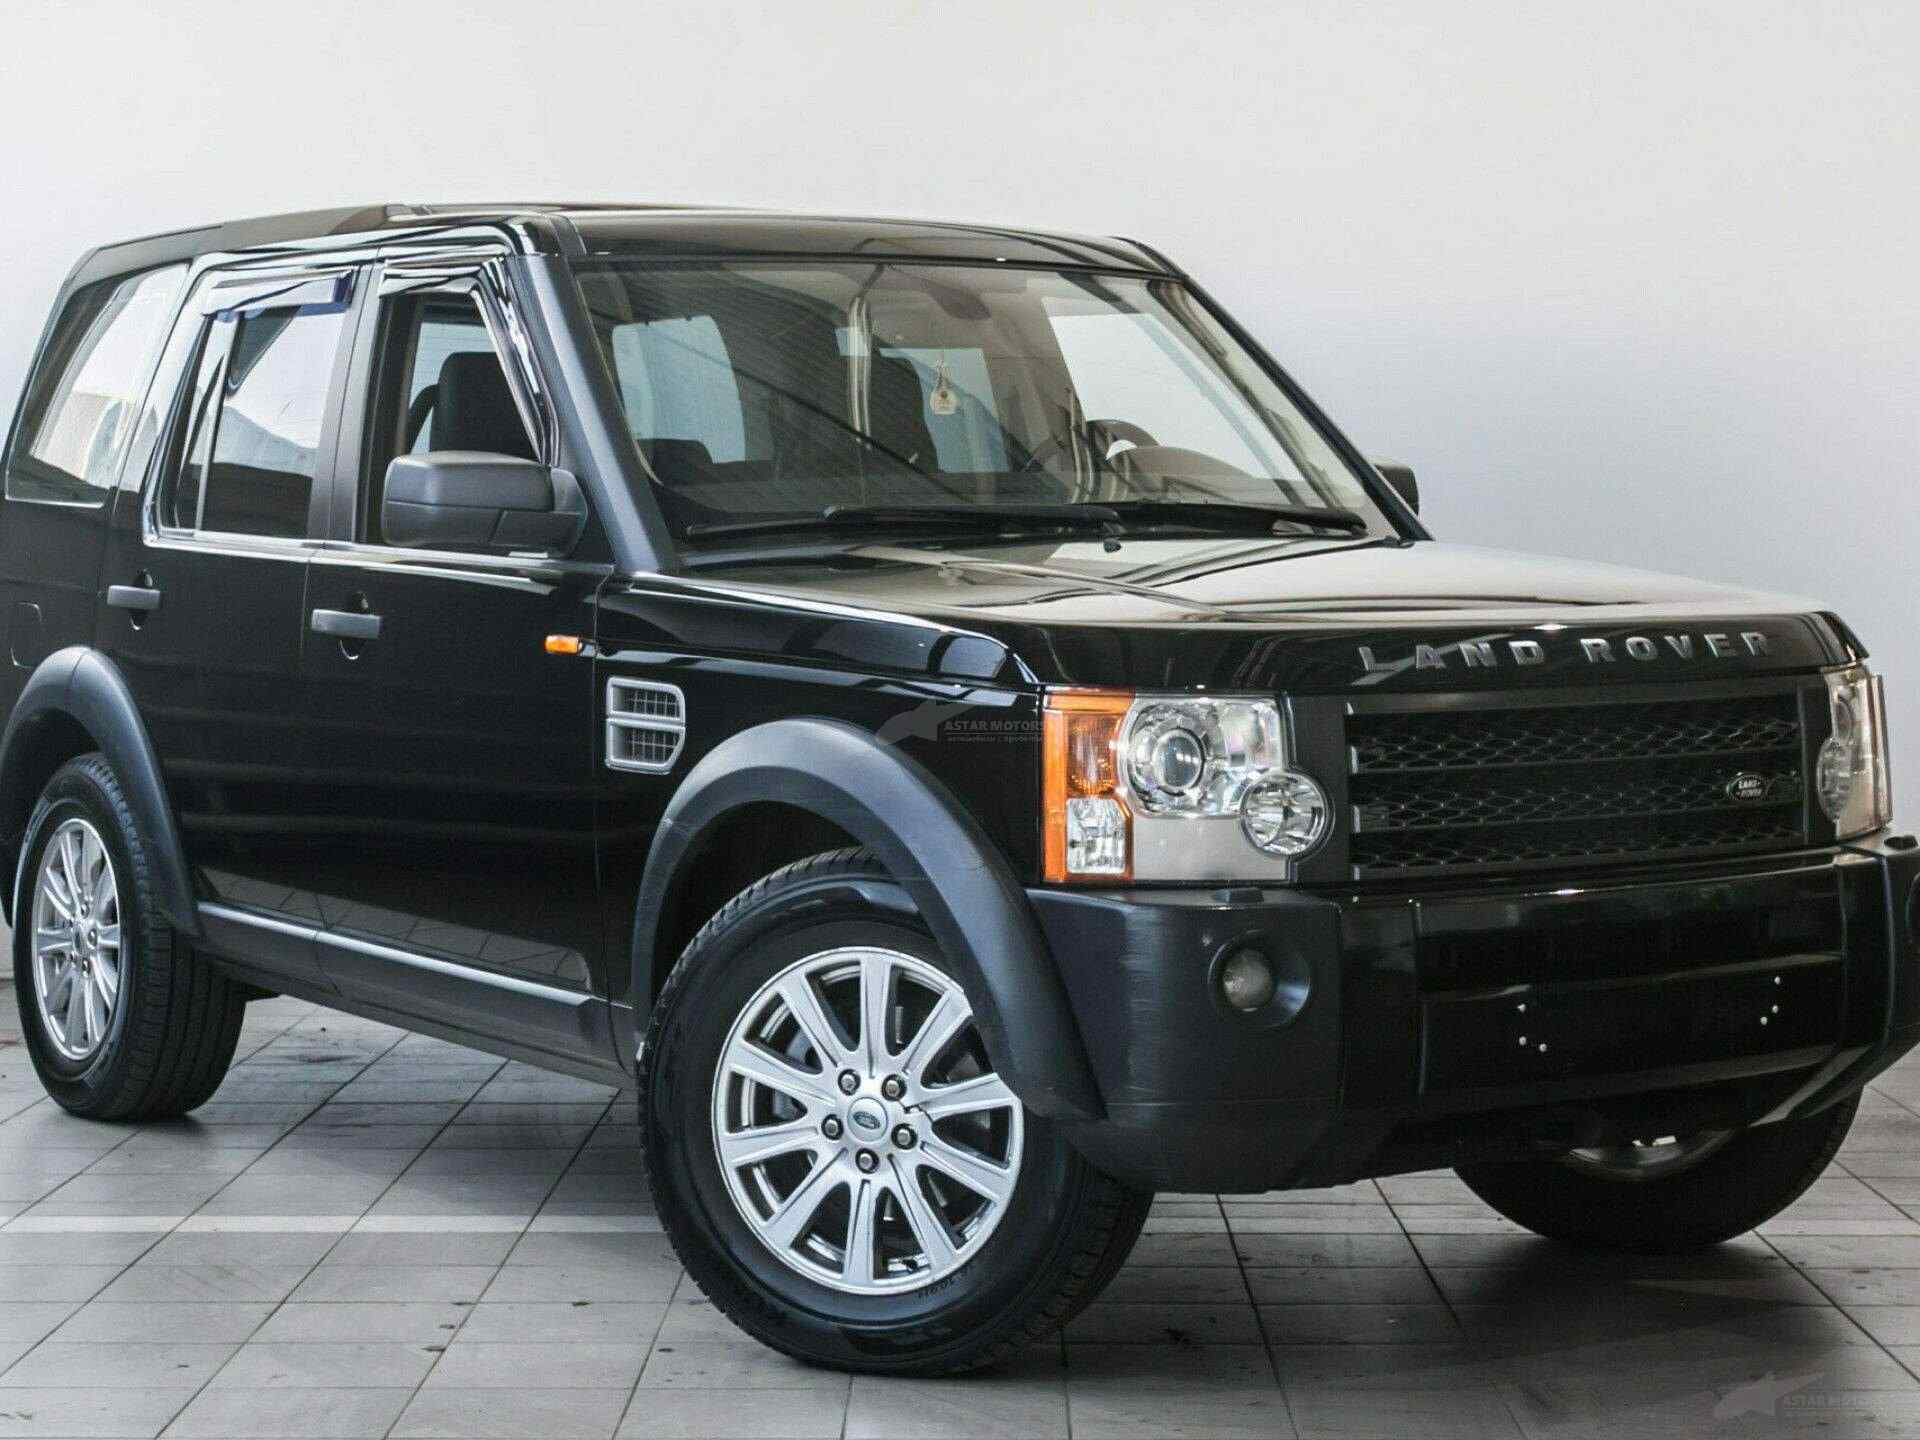 Дискавери 2007. Land Rover Discovery 2008. Land Rover Discovery 2007. Рендж Ровер Дискавери 2007. Land Rover Discovery 2.